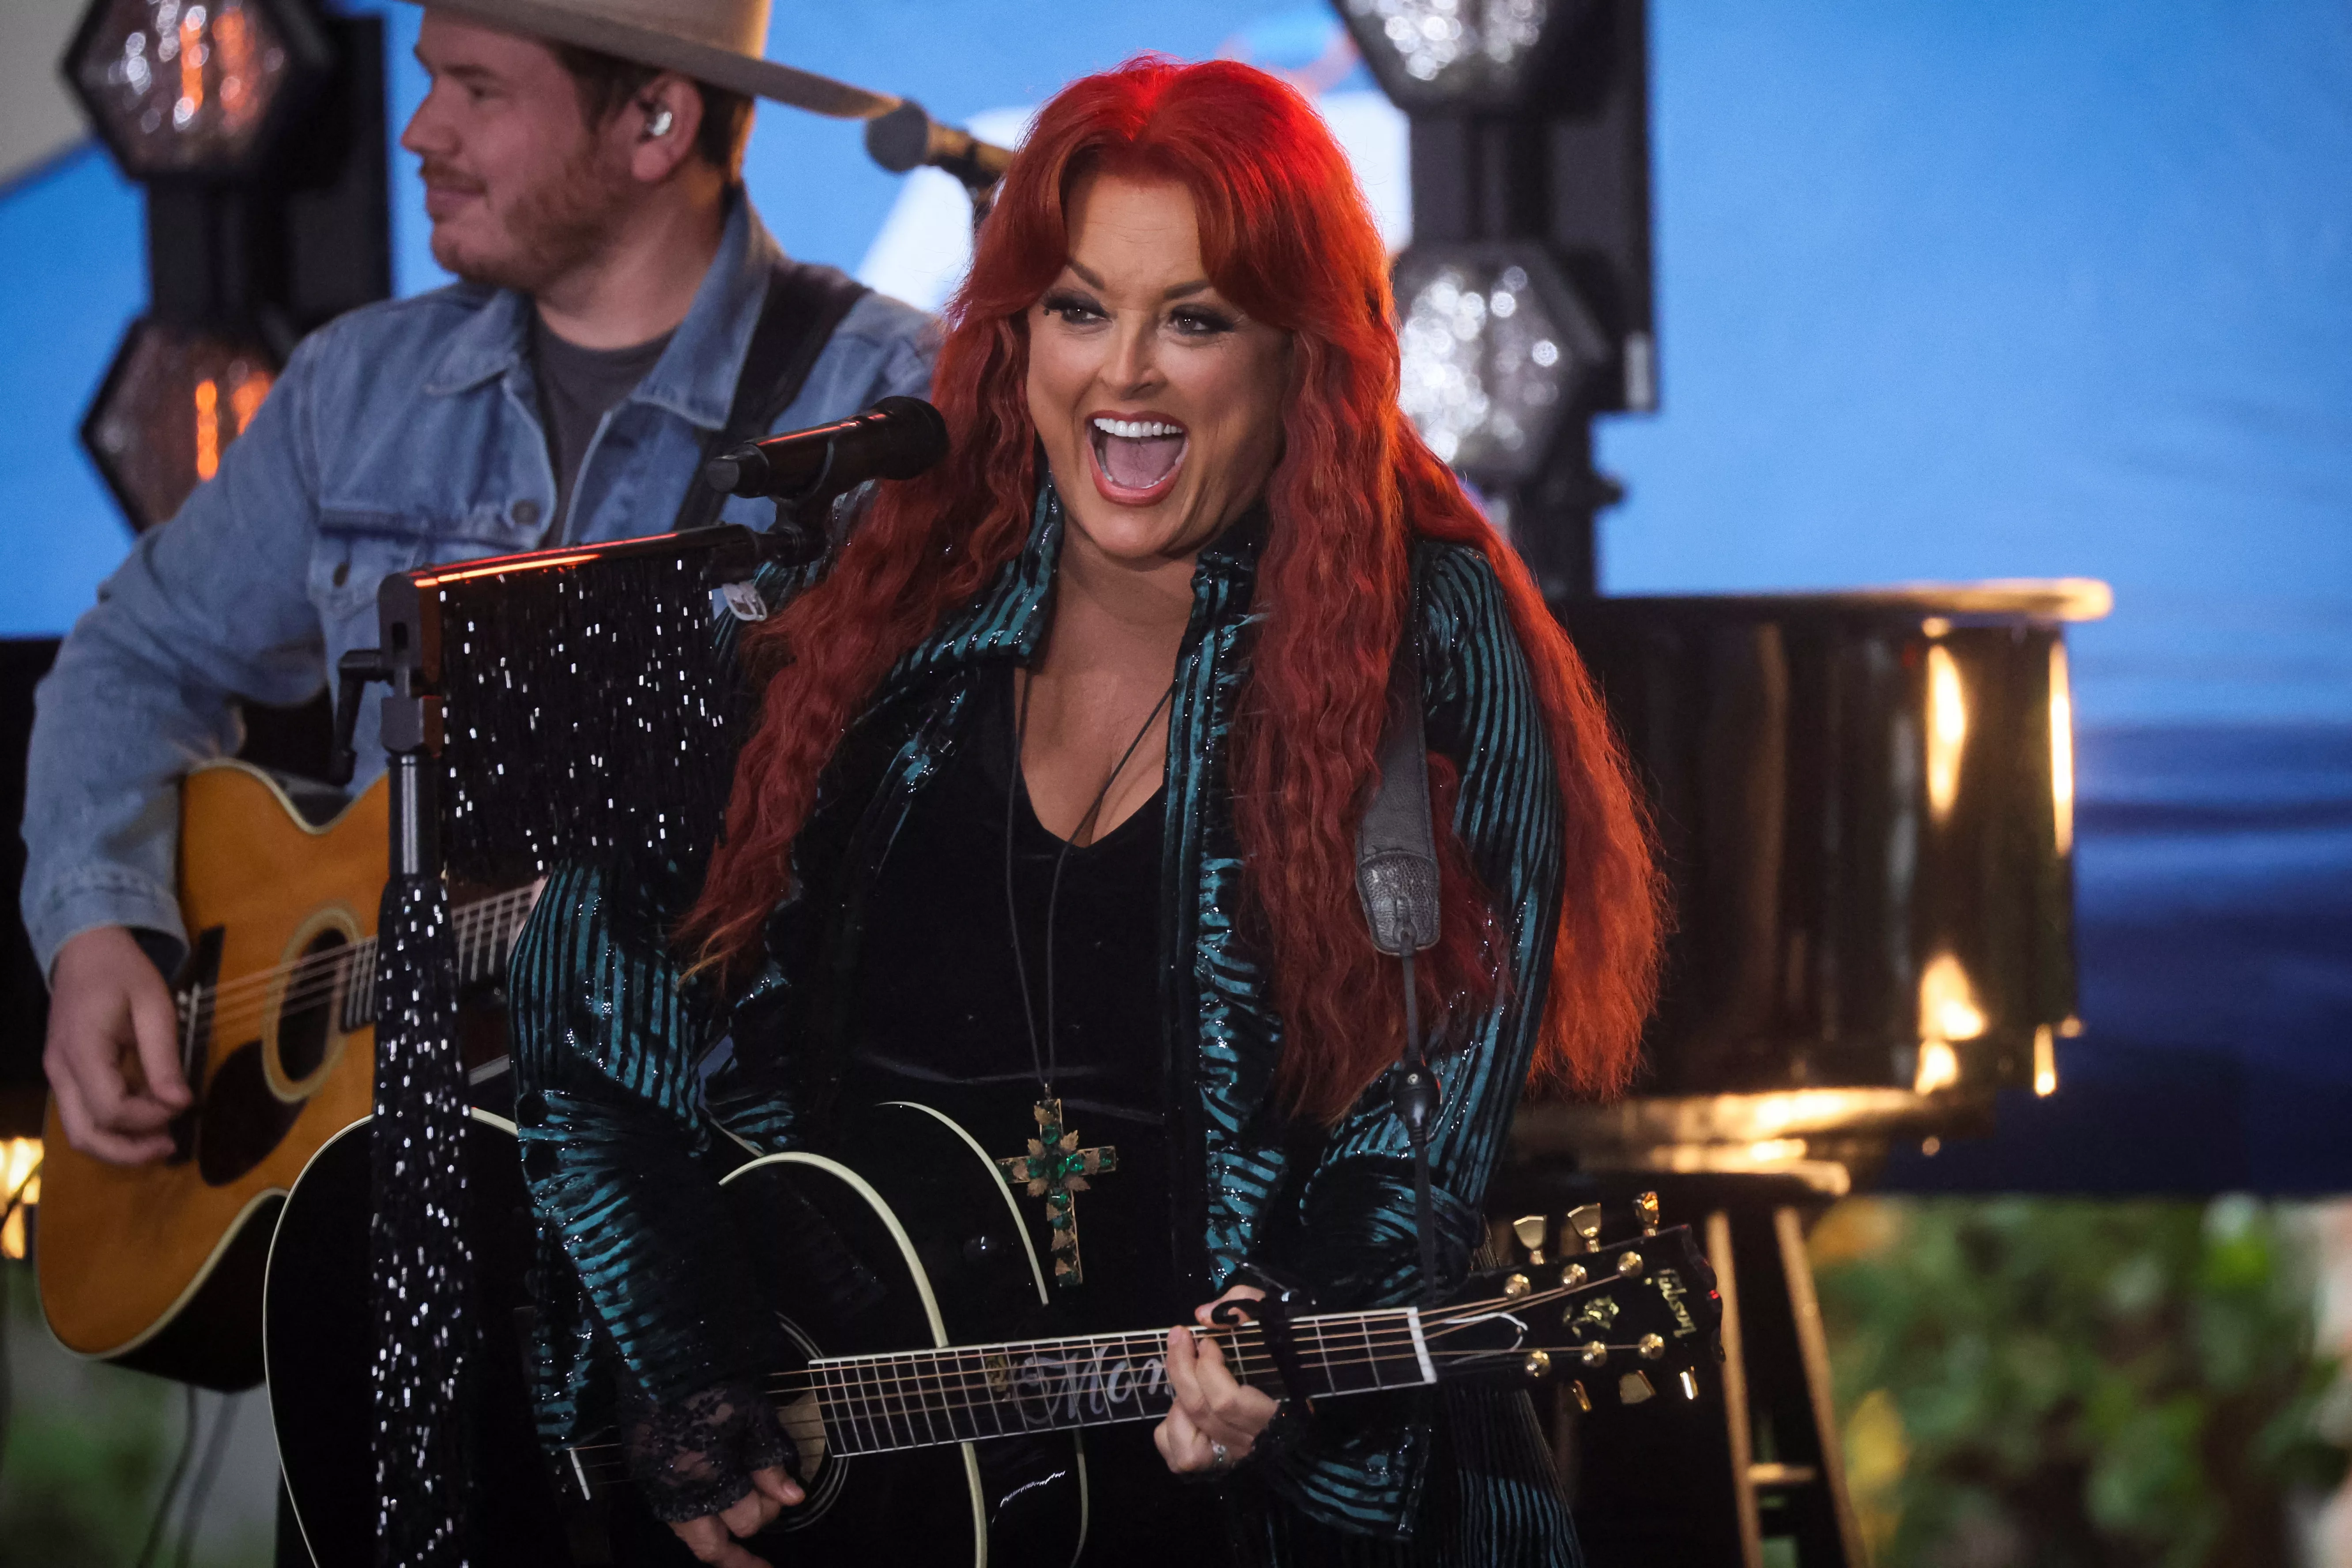 singer-wynonna-judd-performs-on-nbcs-today-show-in-new-york